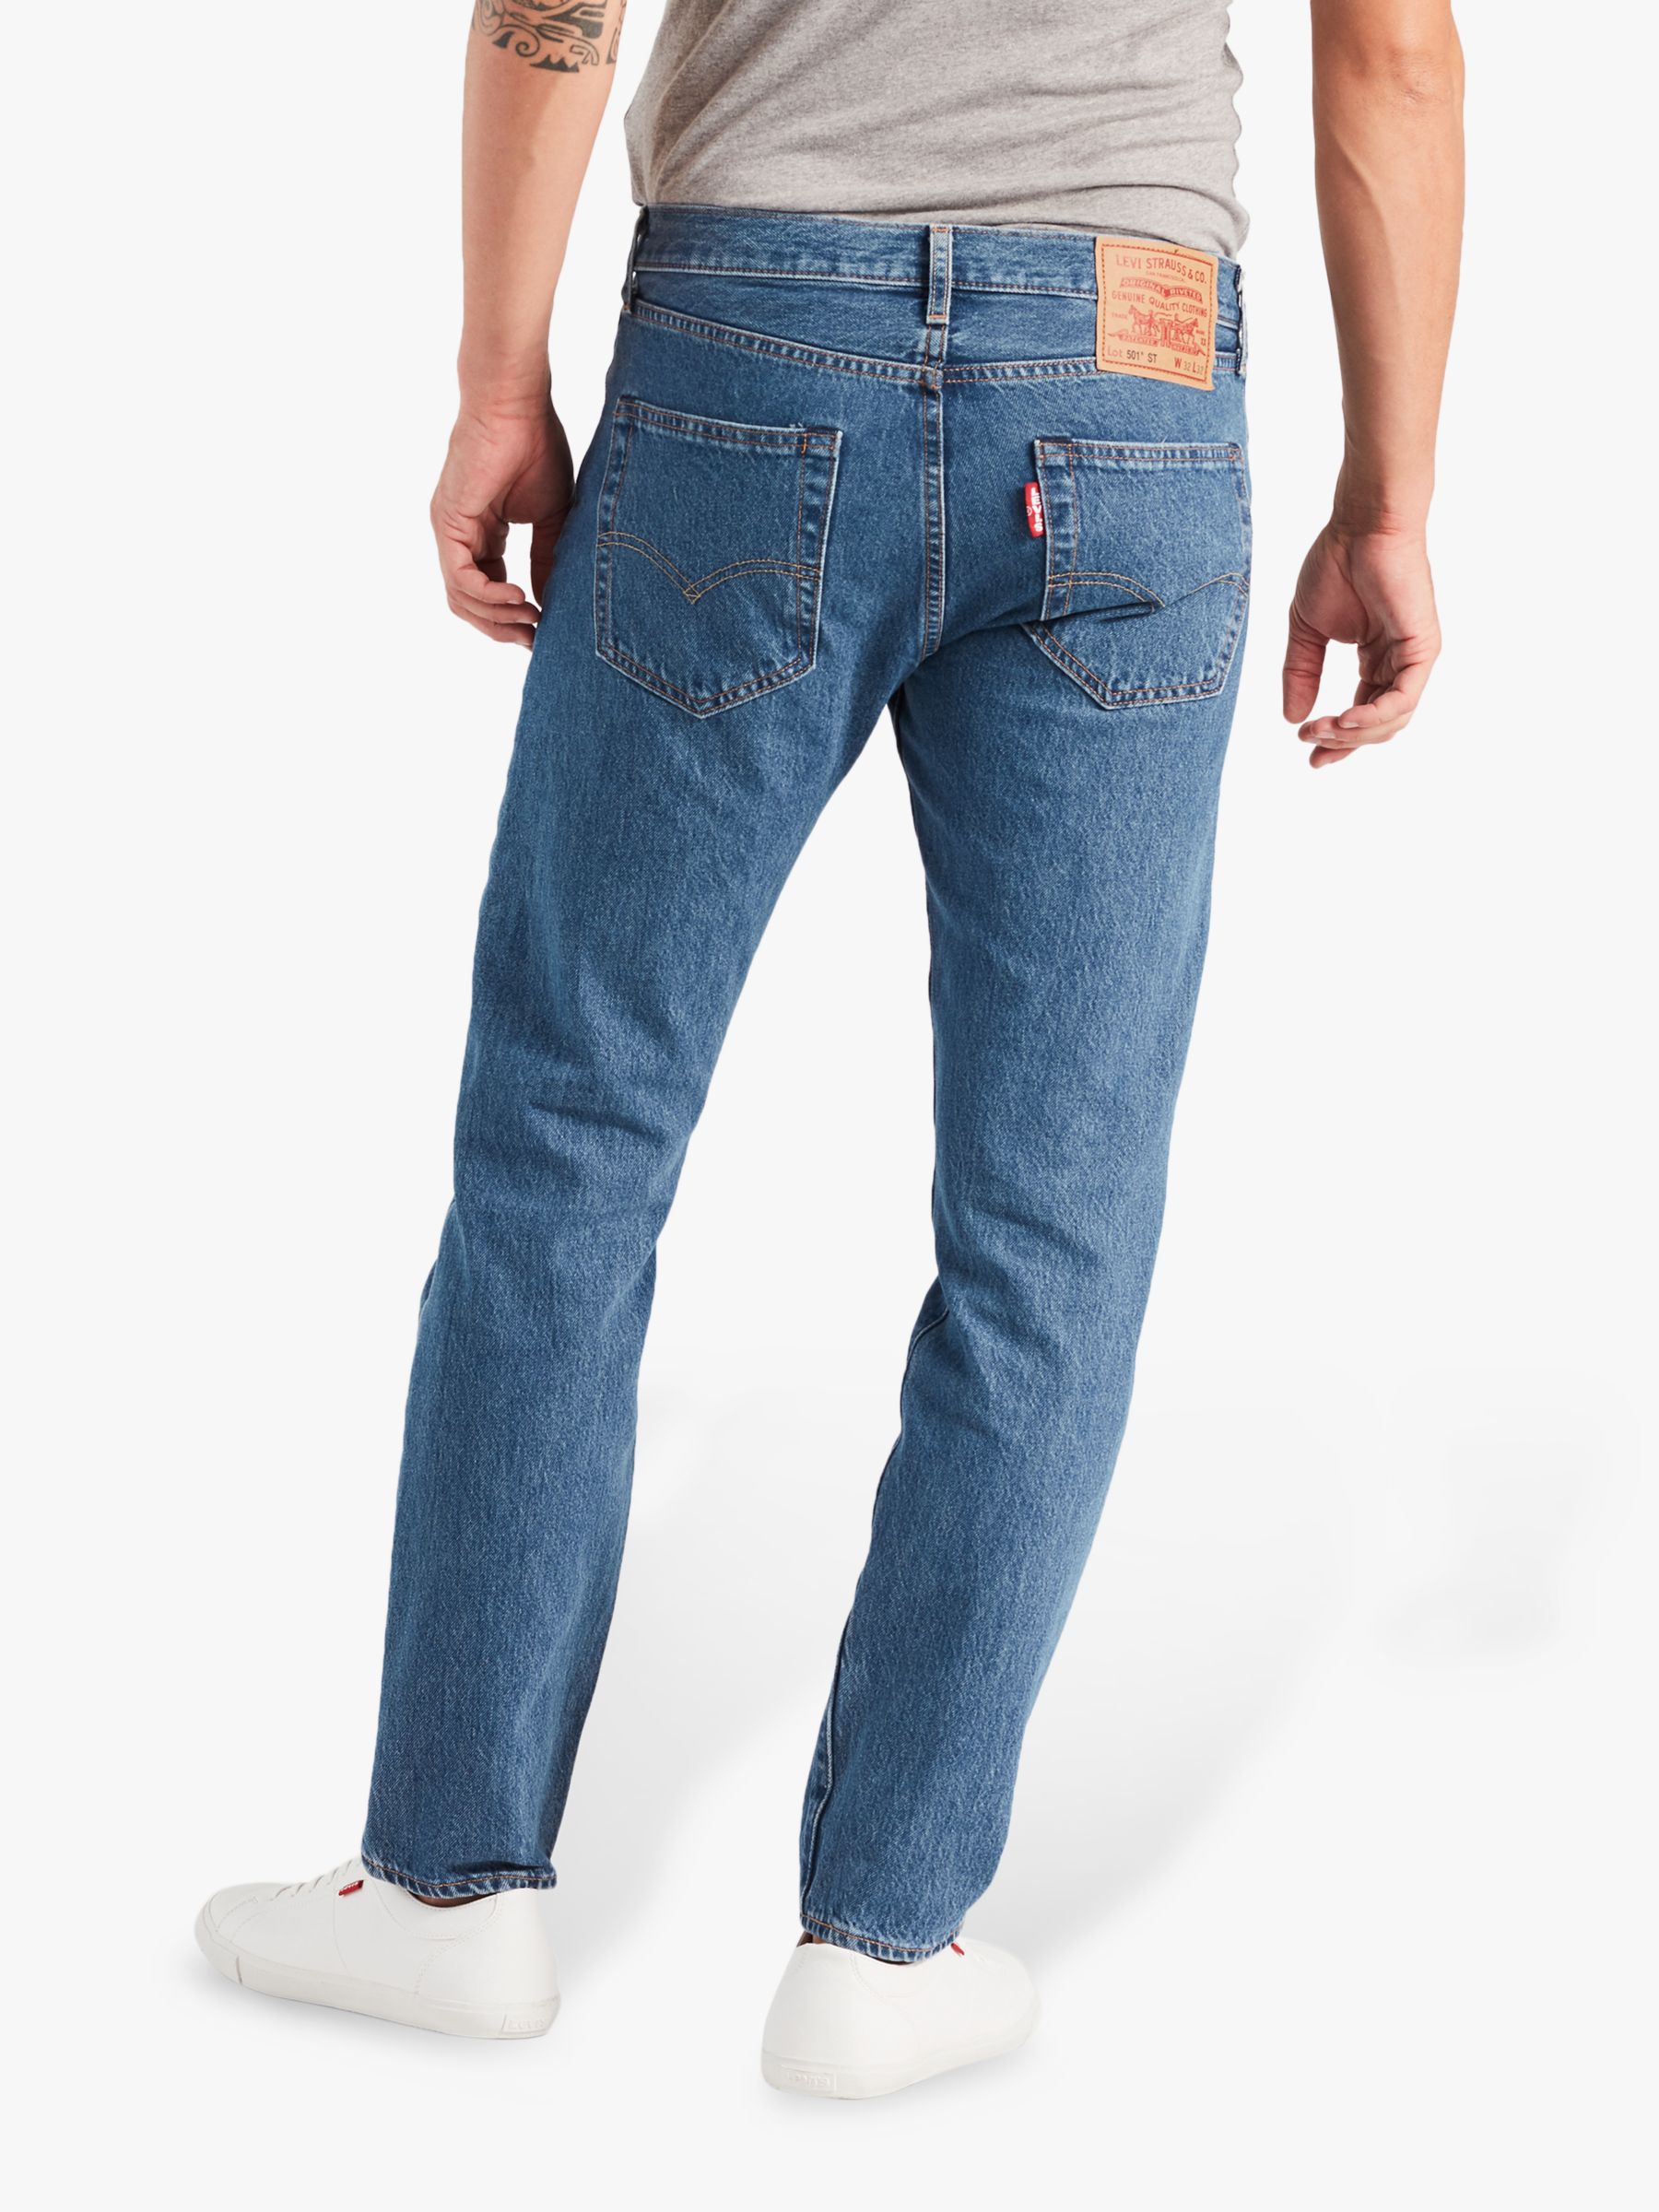 mens 501 tapered jeans